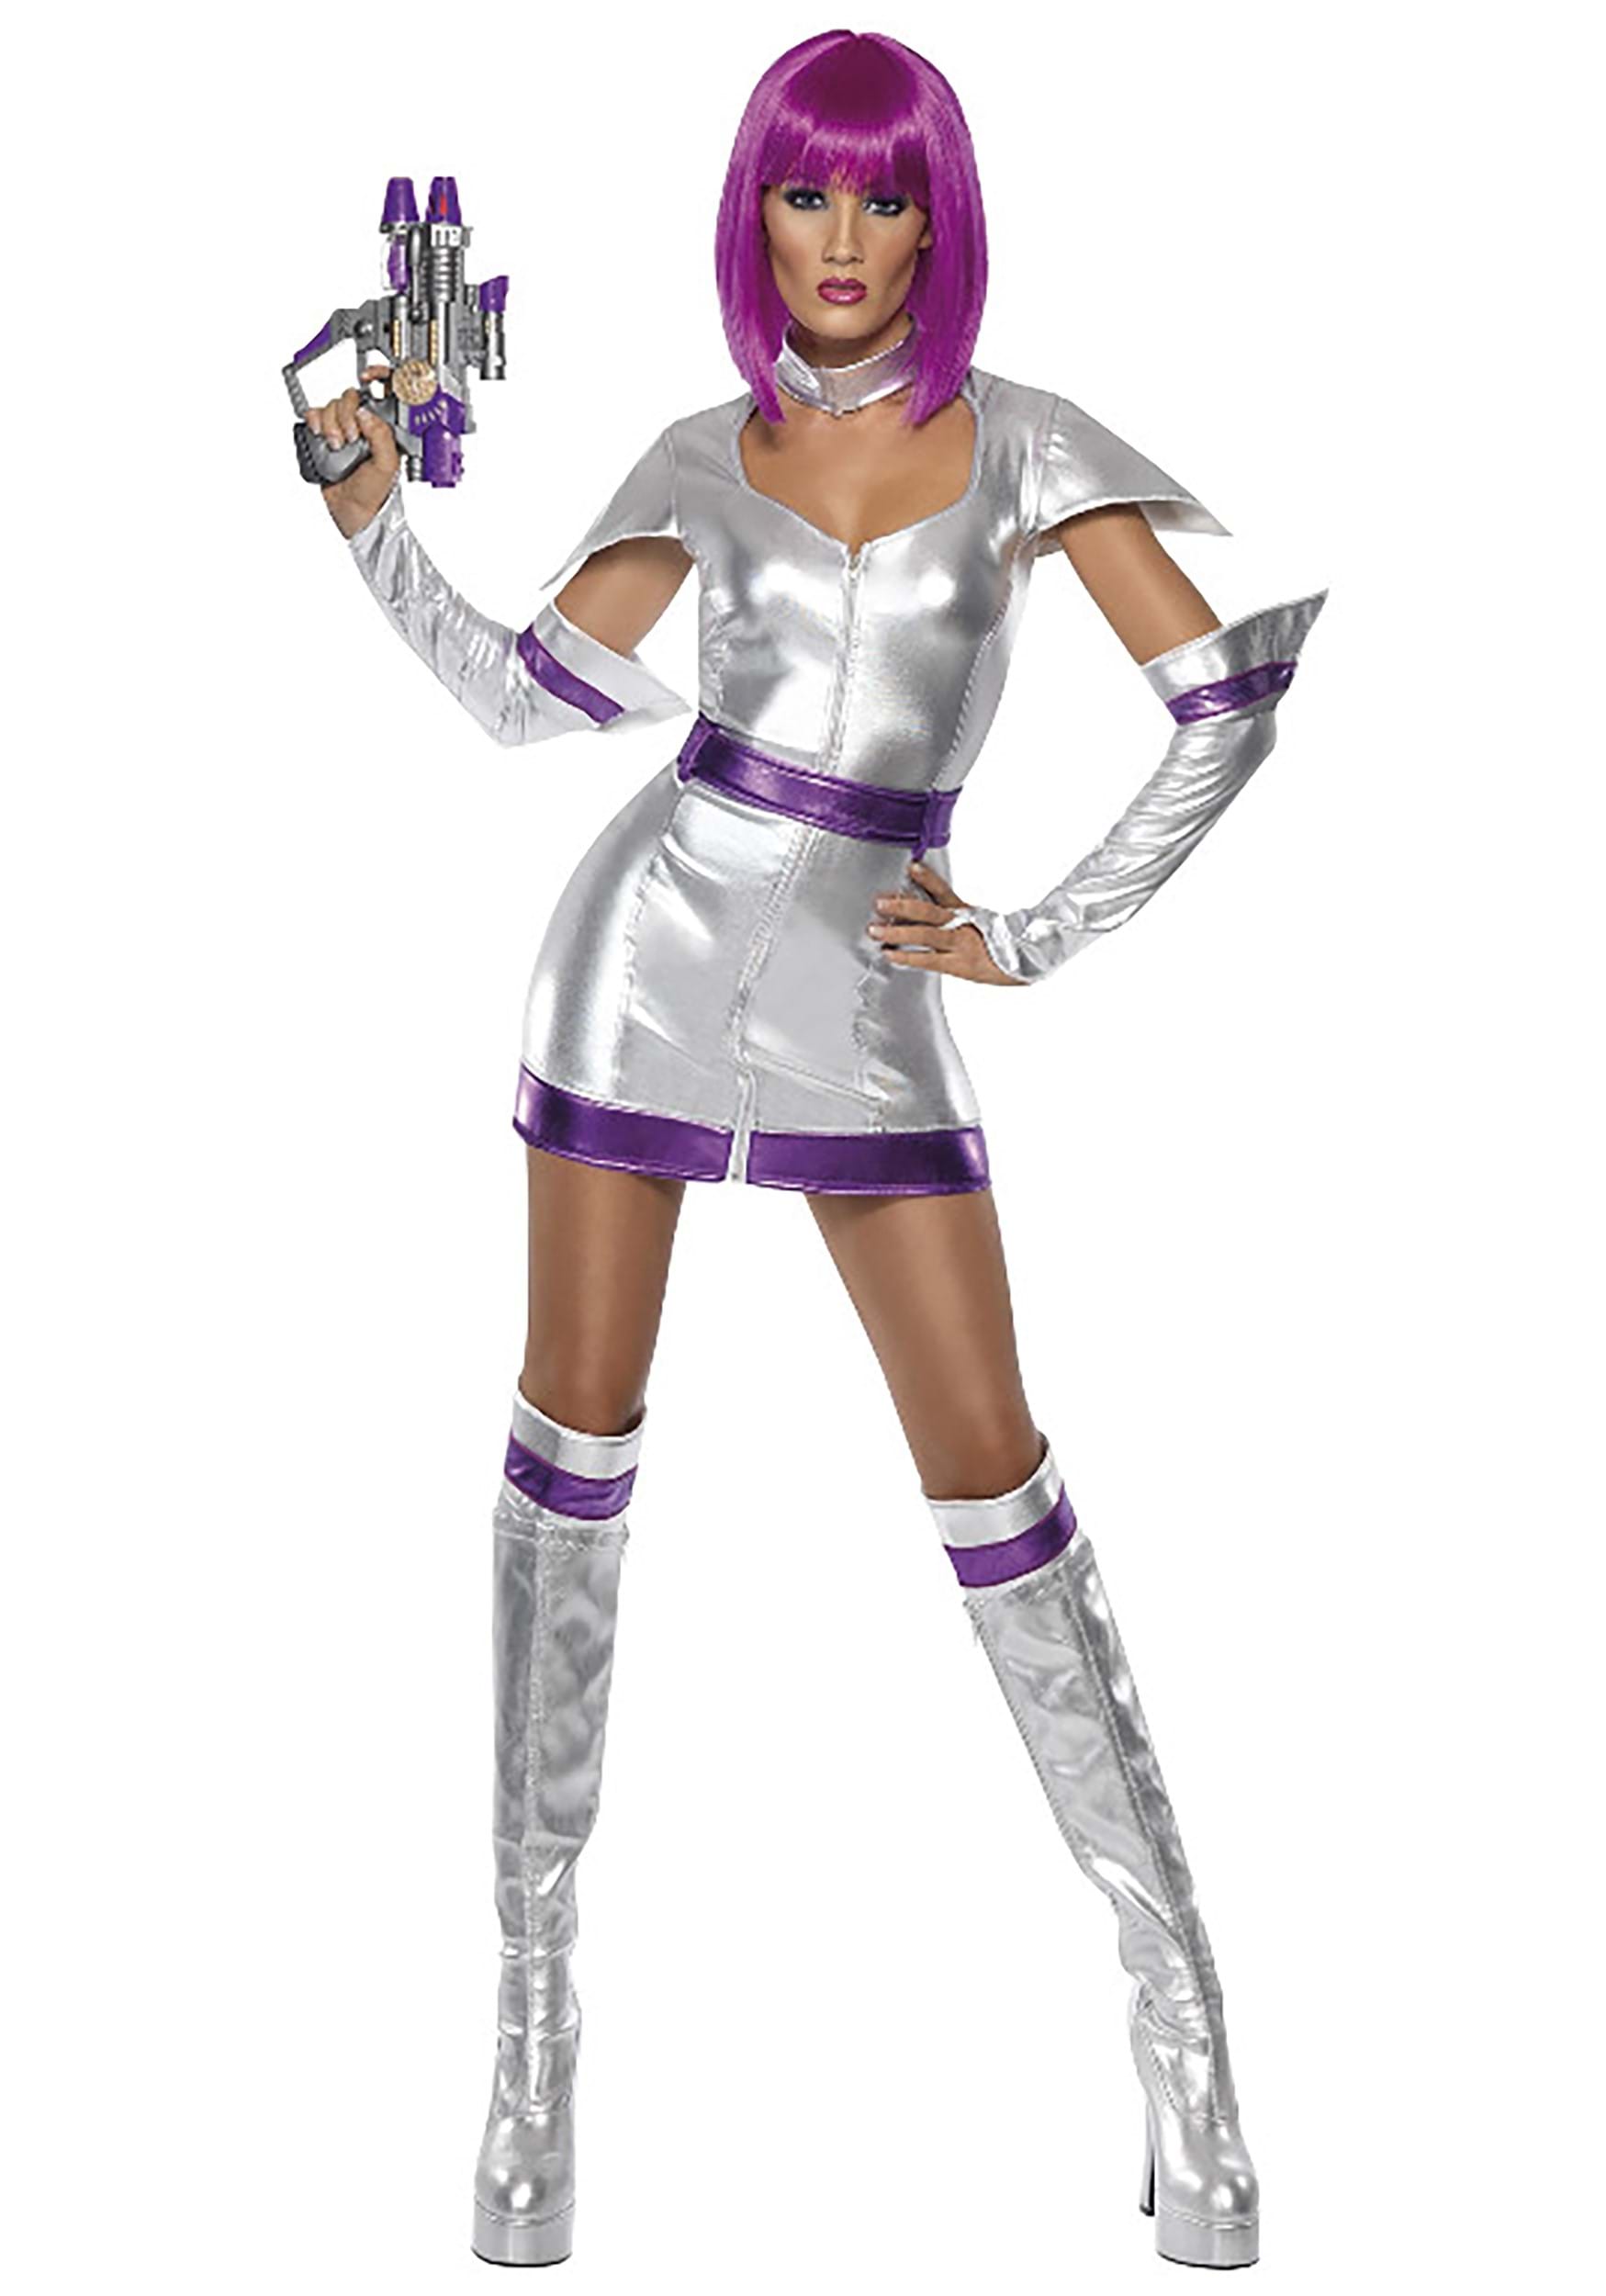 Photos - Fancy Dress Smiffys Sexy Fever Space Cadet Costume for Women Purple/Gray SM33469